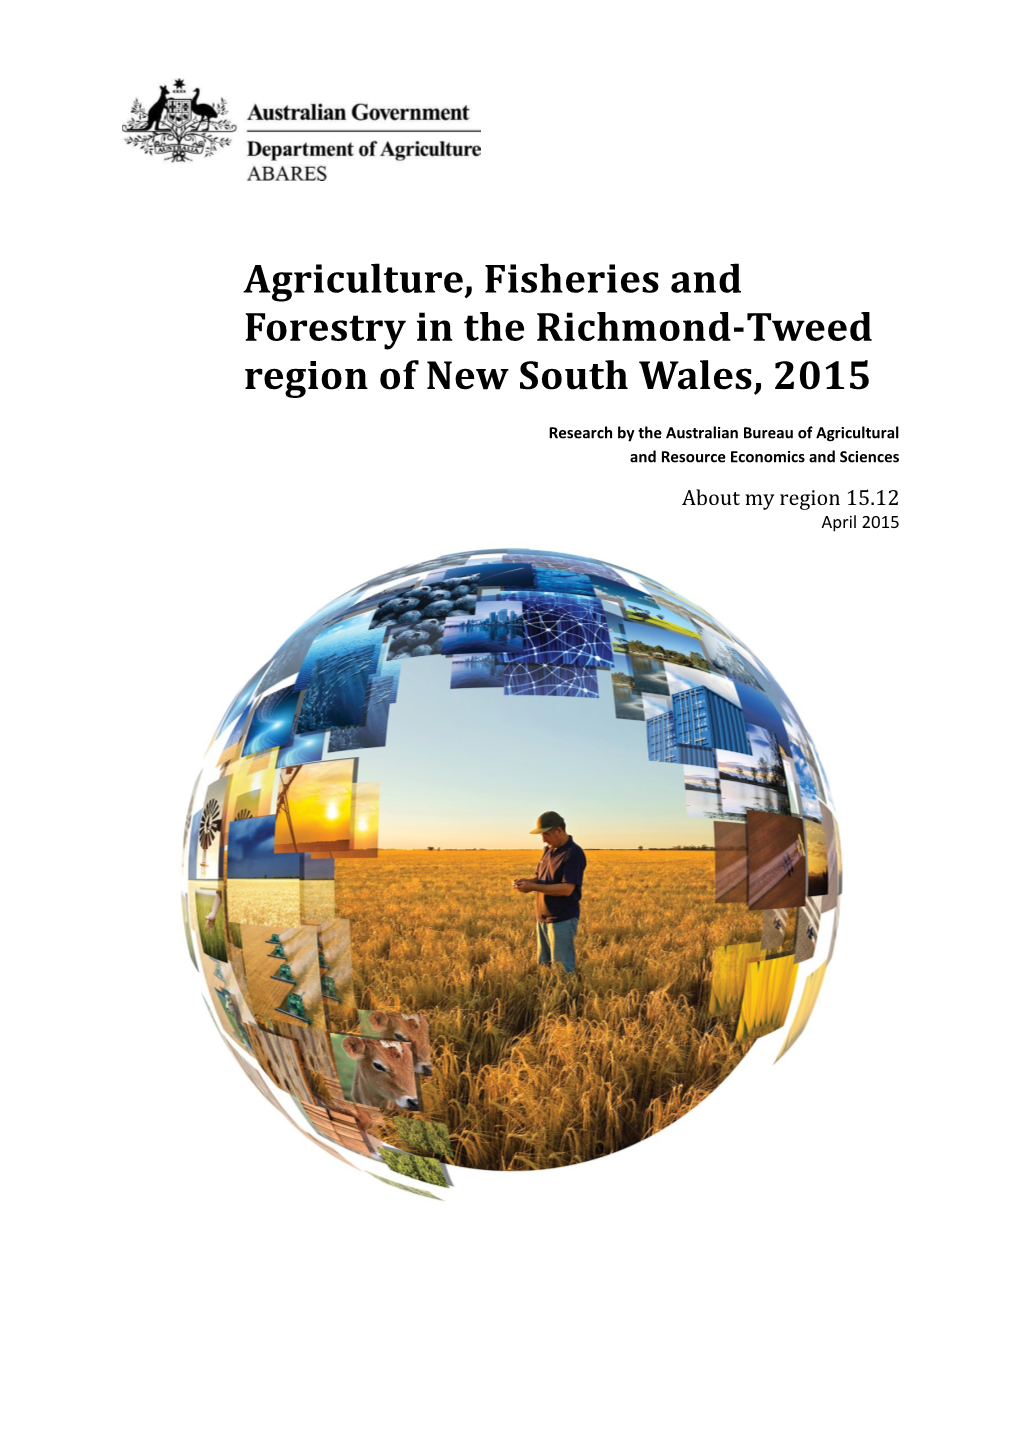 Agriculture, Fisheries and Forestry in the Richmond-Tweed Region of New South Wales, 2015